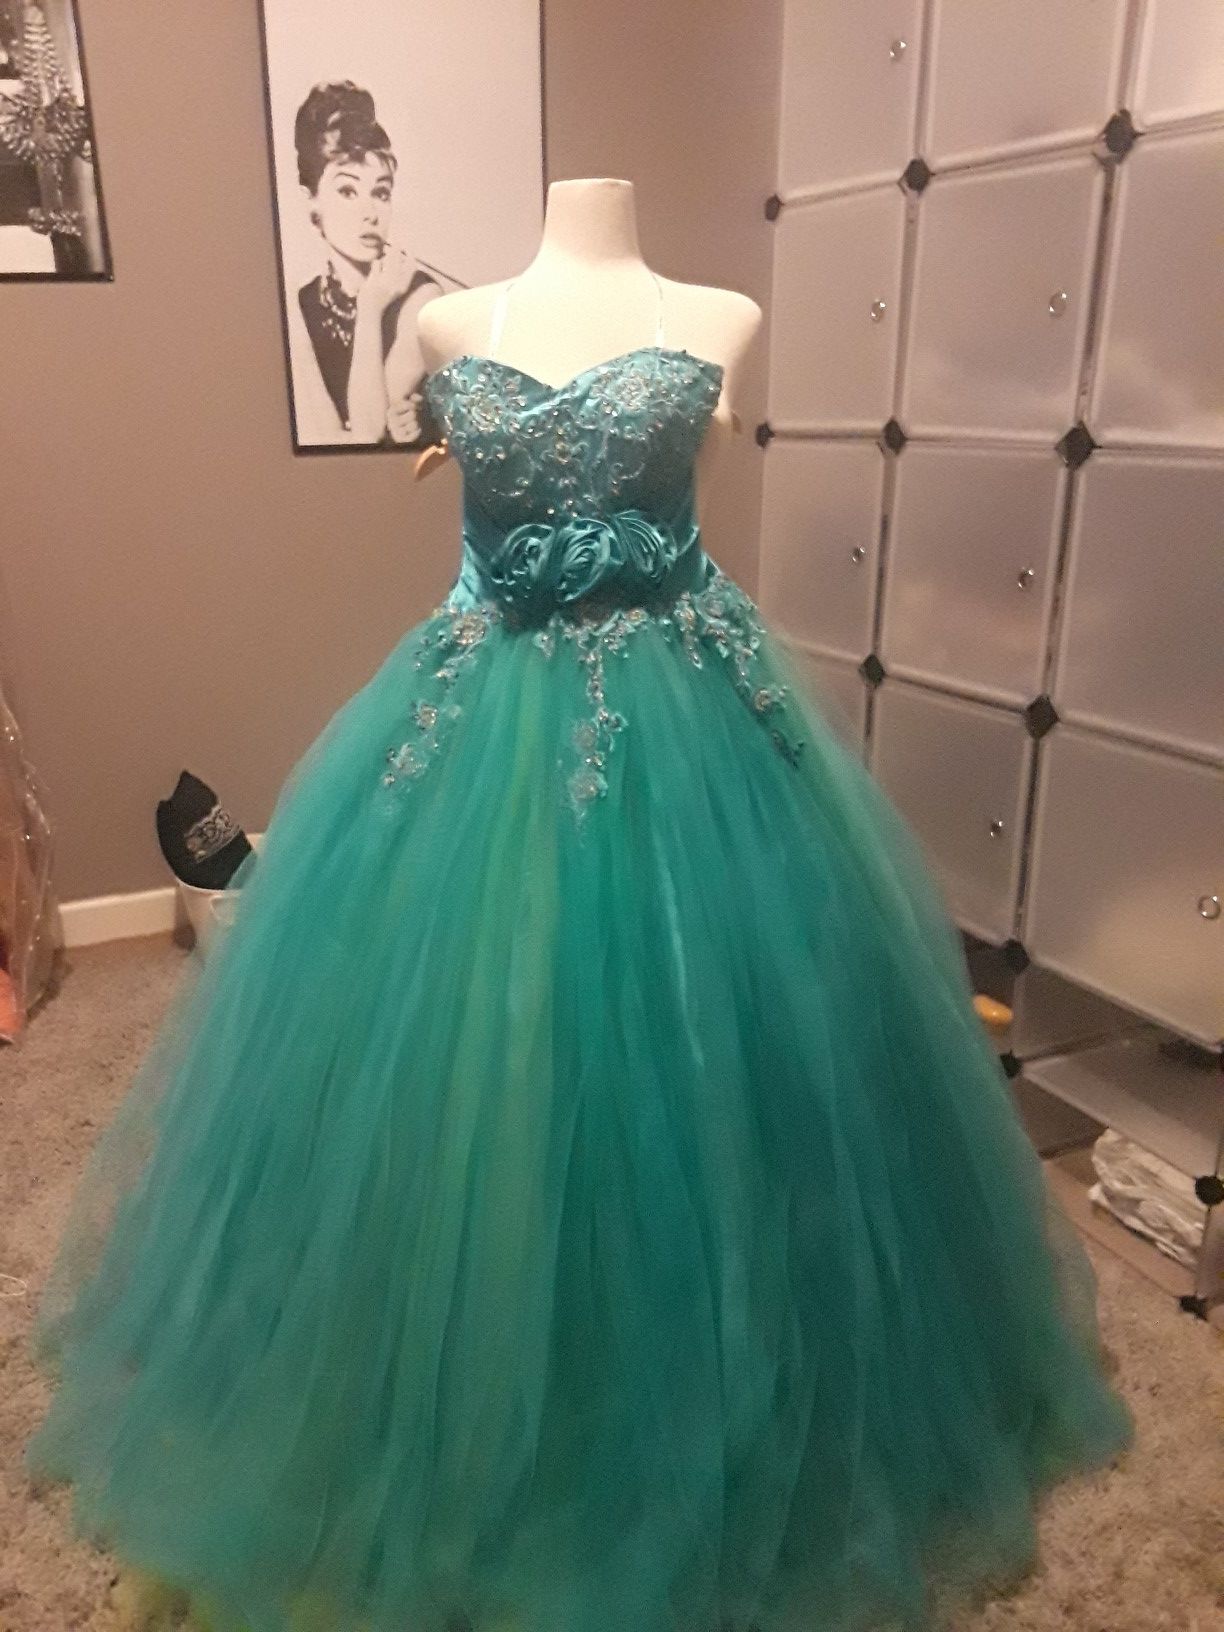 Quince(15's) or Sweet 16 dress # 227